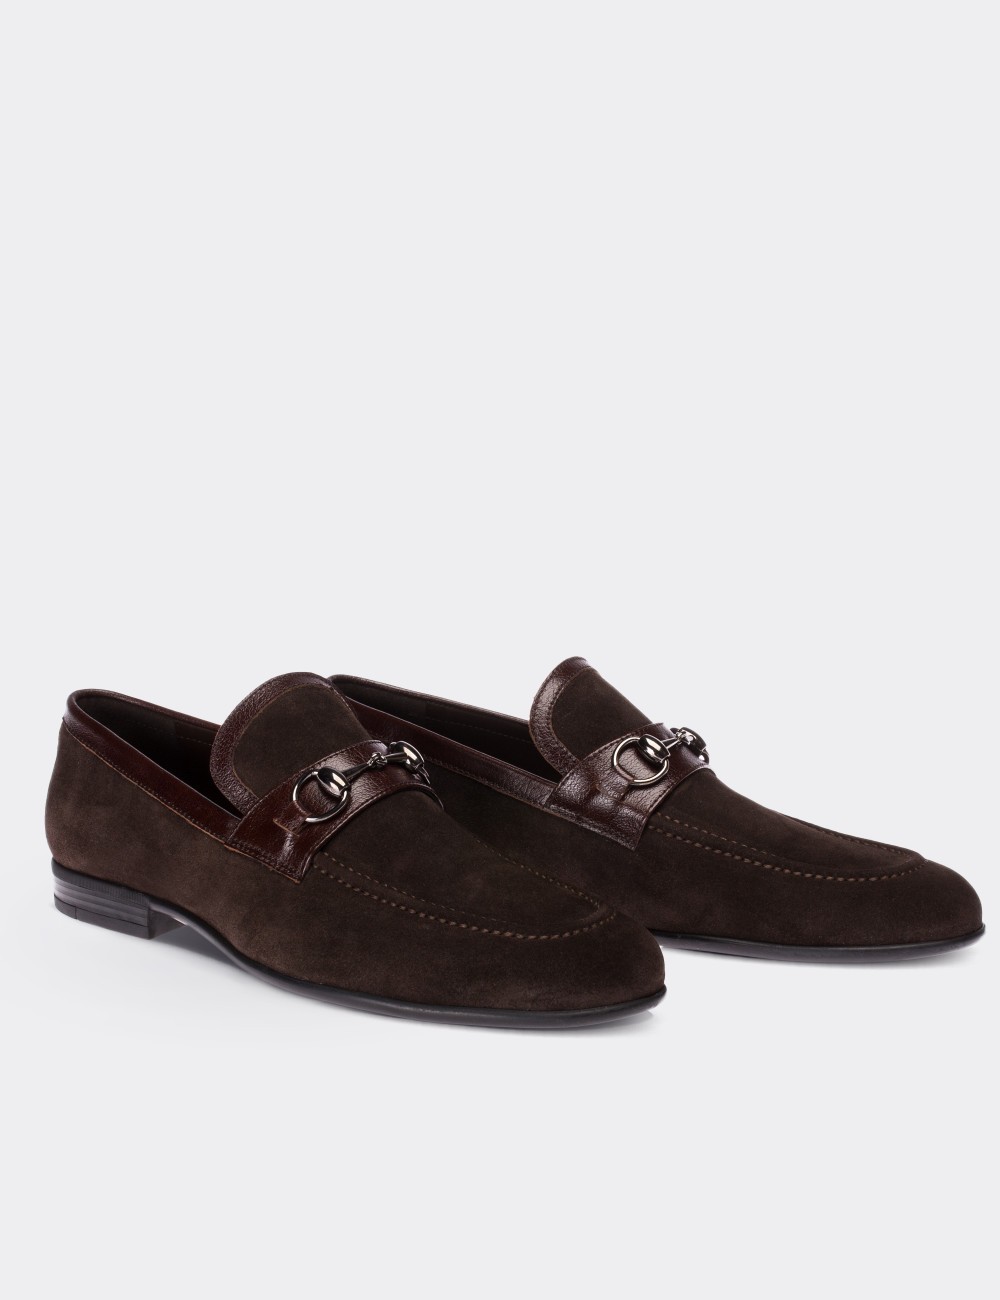 Brown Suede Leather Loafers - 01712MKHVC01